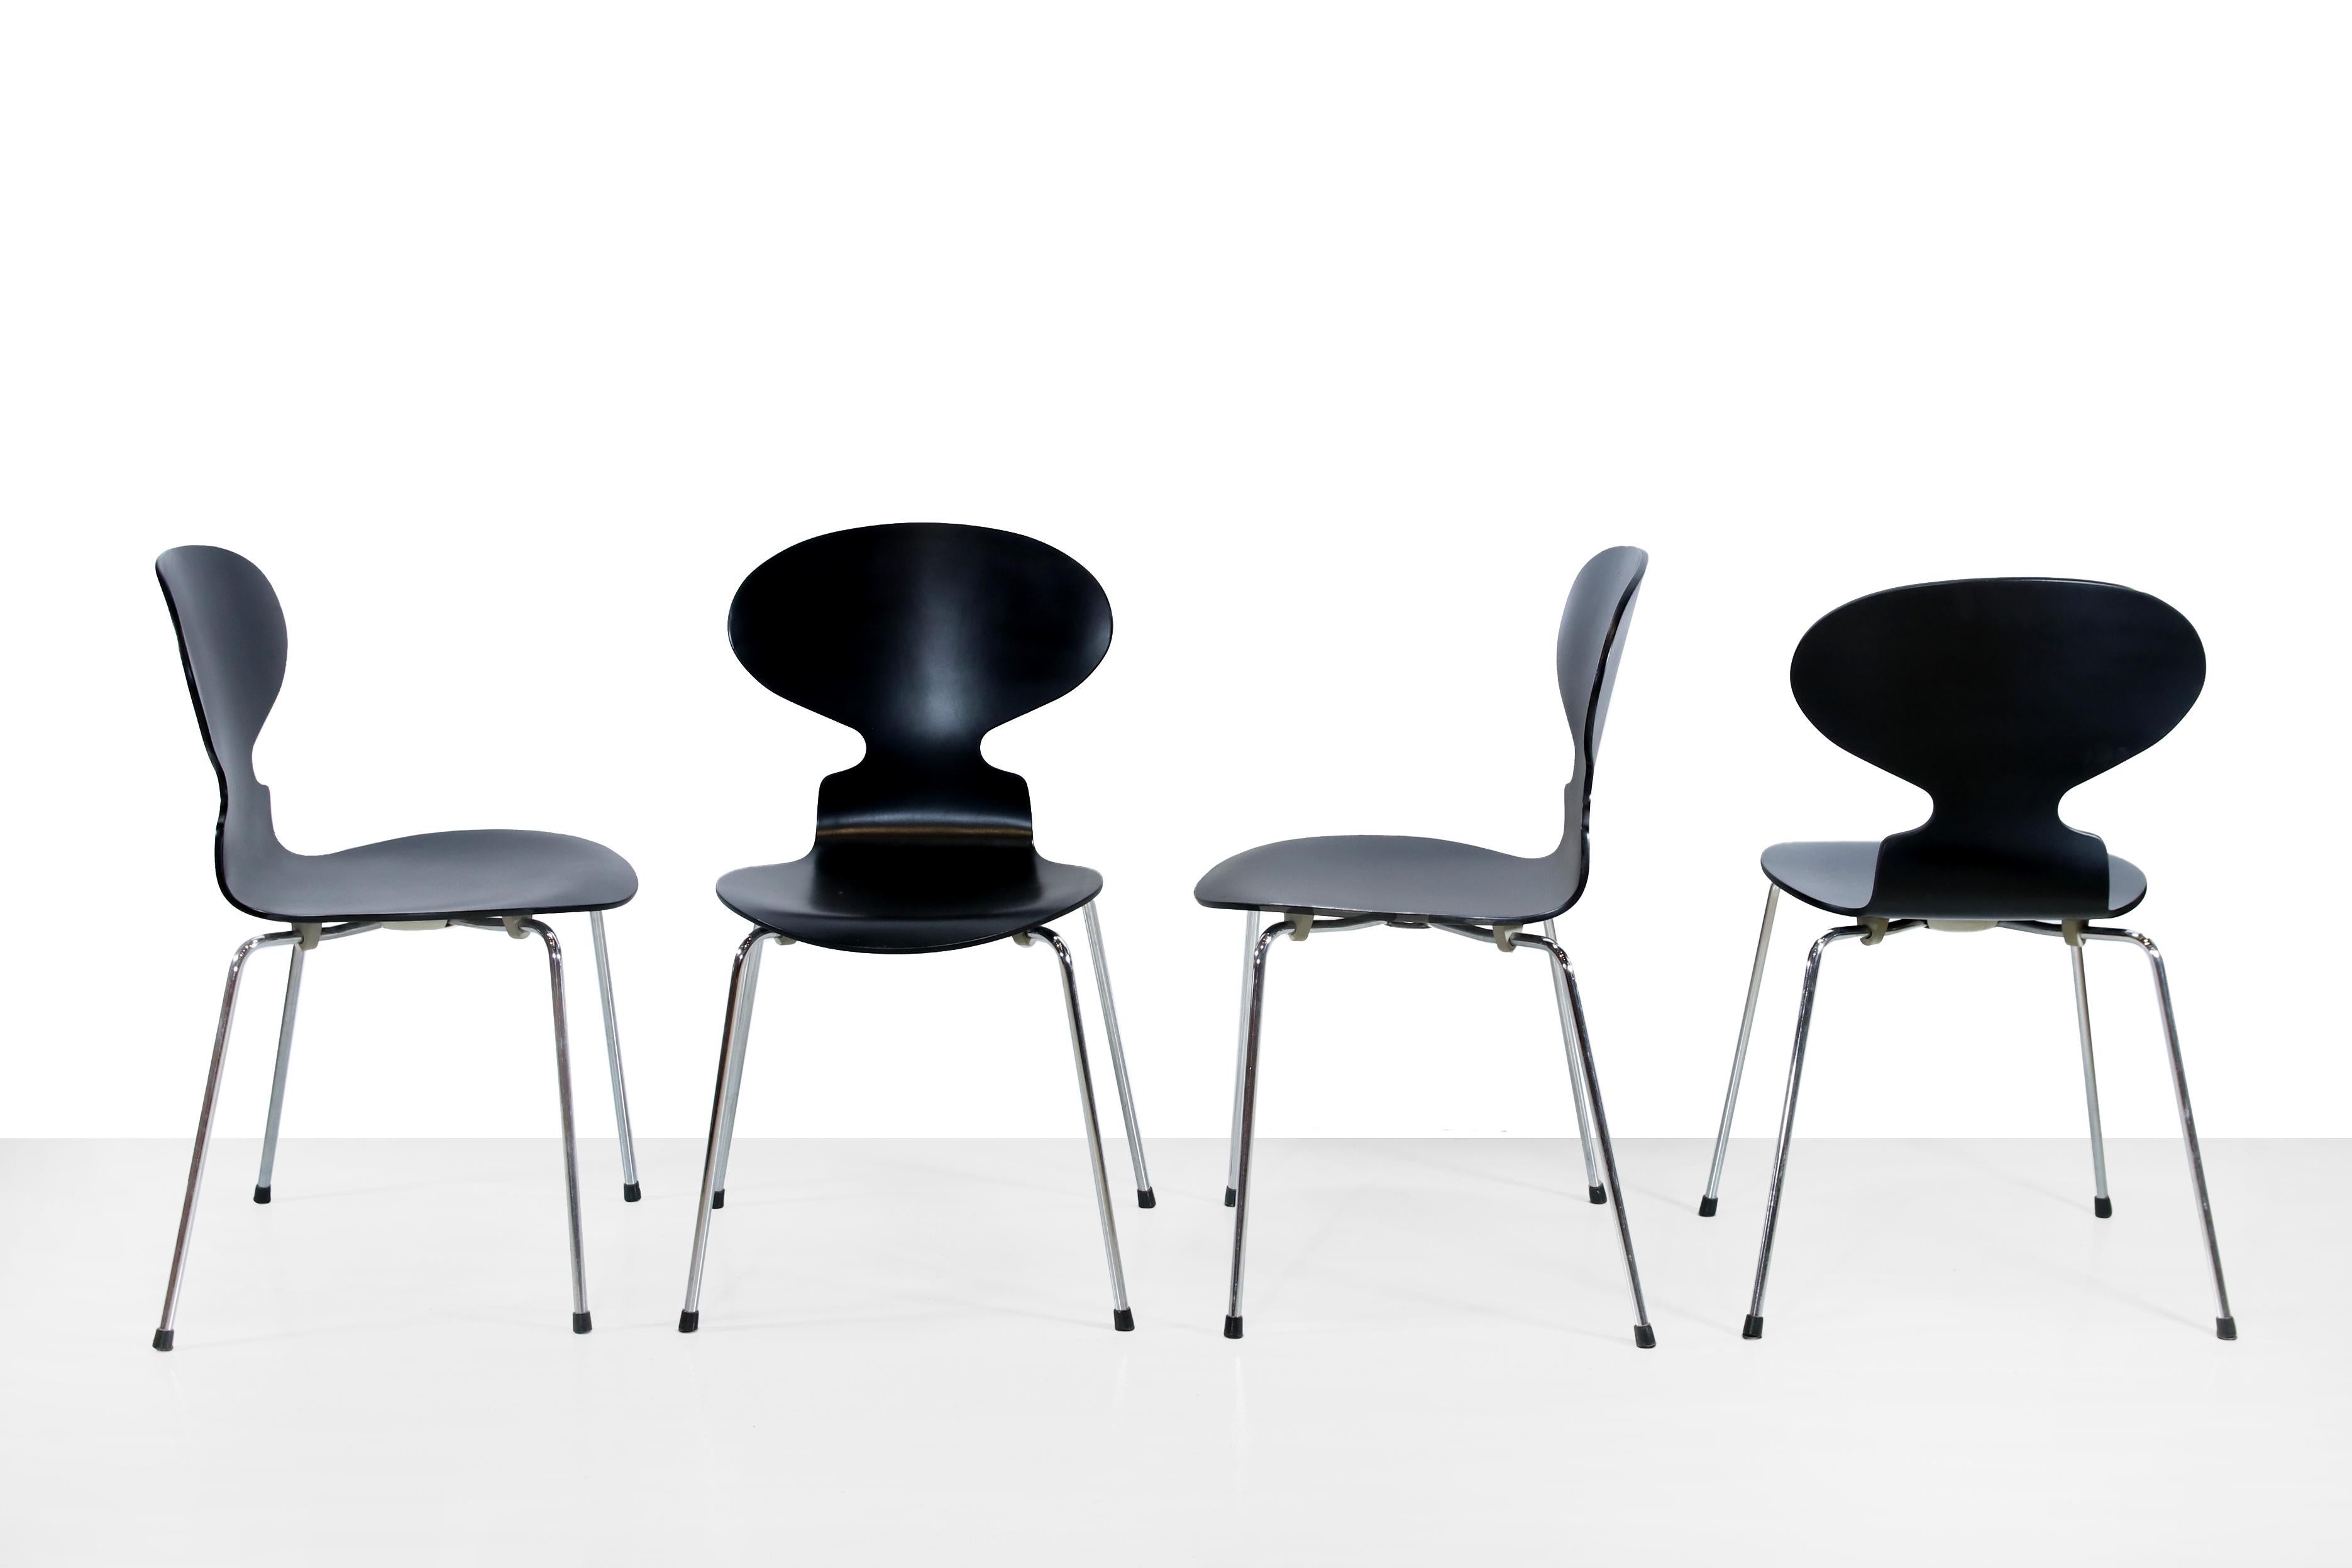 Four beautiful chairs by Arne Jacobsen for Fritz Hansen. The official name of the chairs is 'chair 3100', but they are also called 'the Ant' due to their shape. This set is made of black lacquered plywood, they all have the original plastic cap on